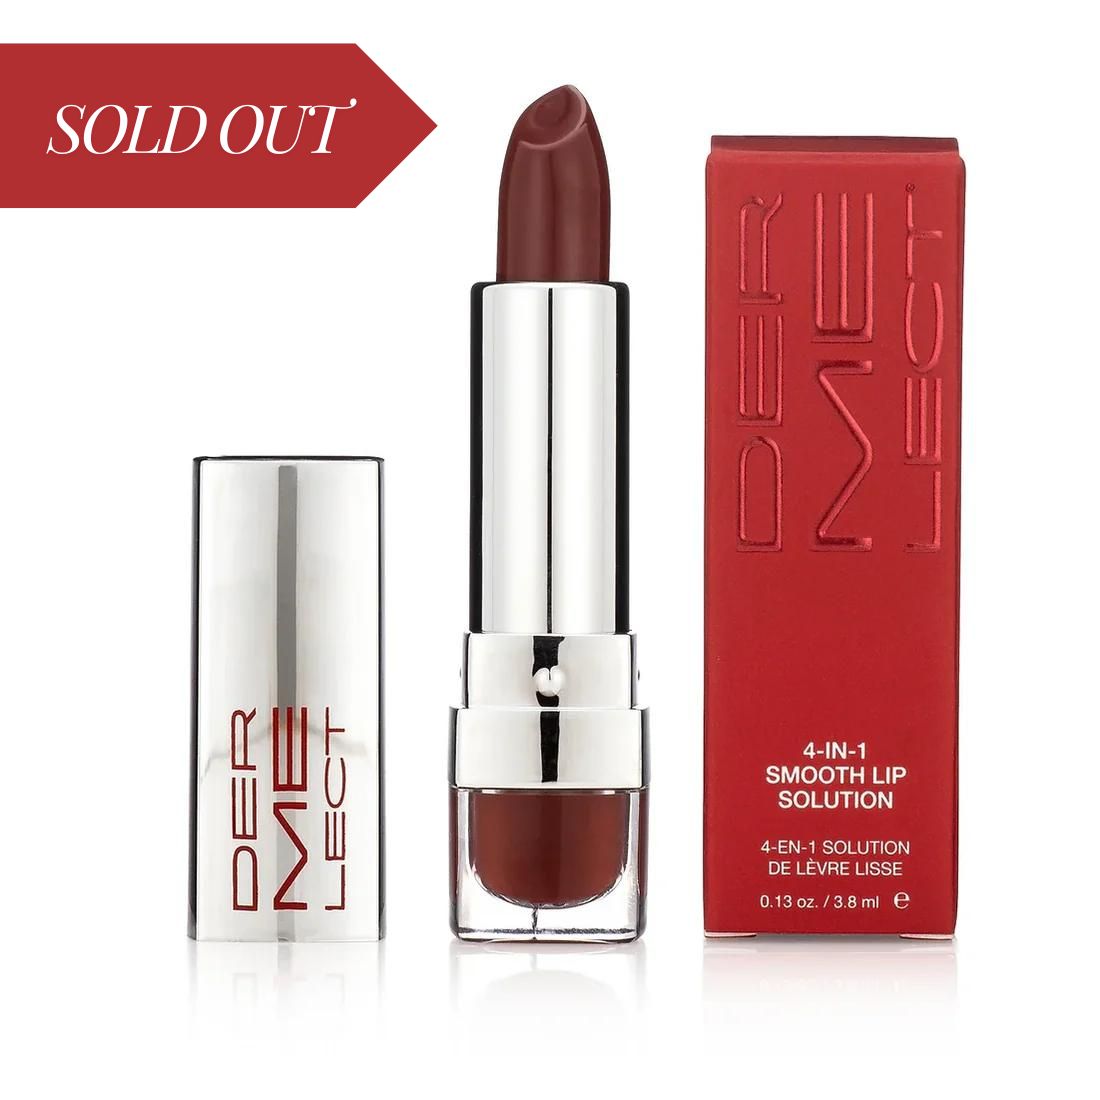 4-in-1 Smooth Lip Solution Audacious: Warm Brick Red